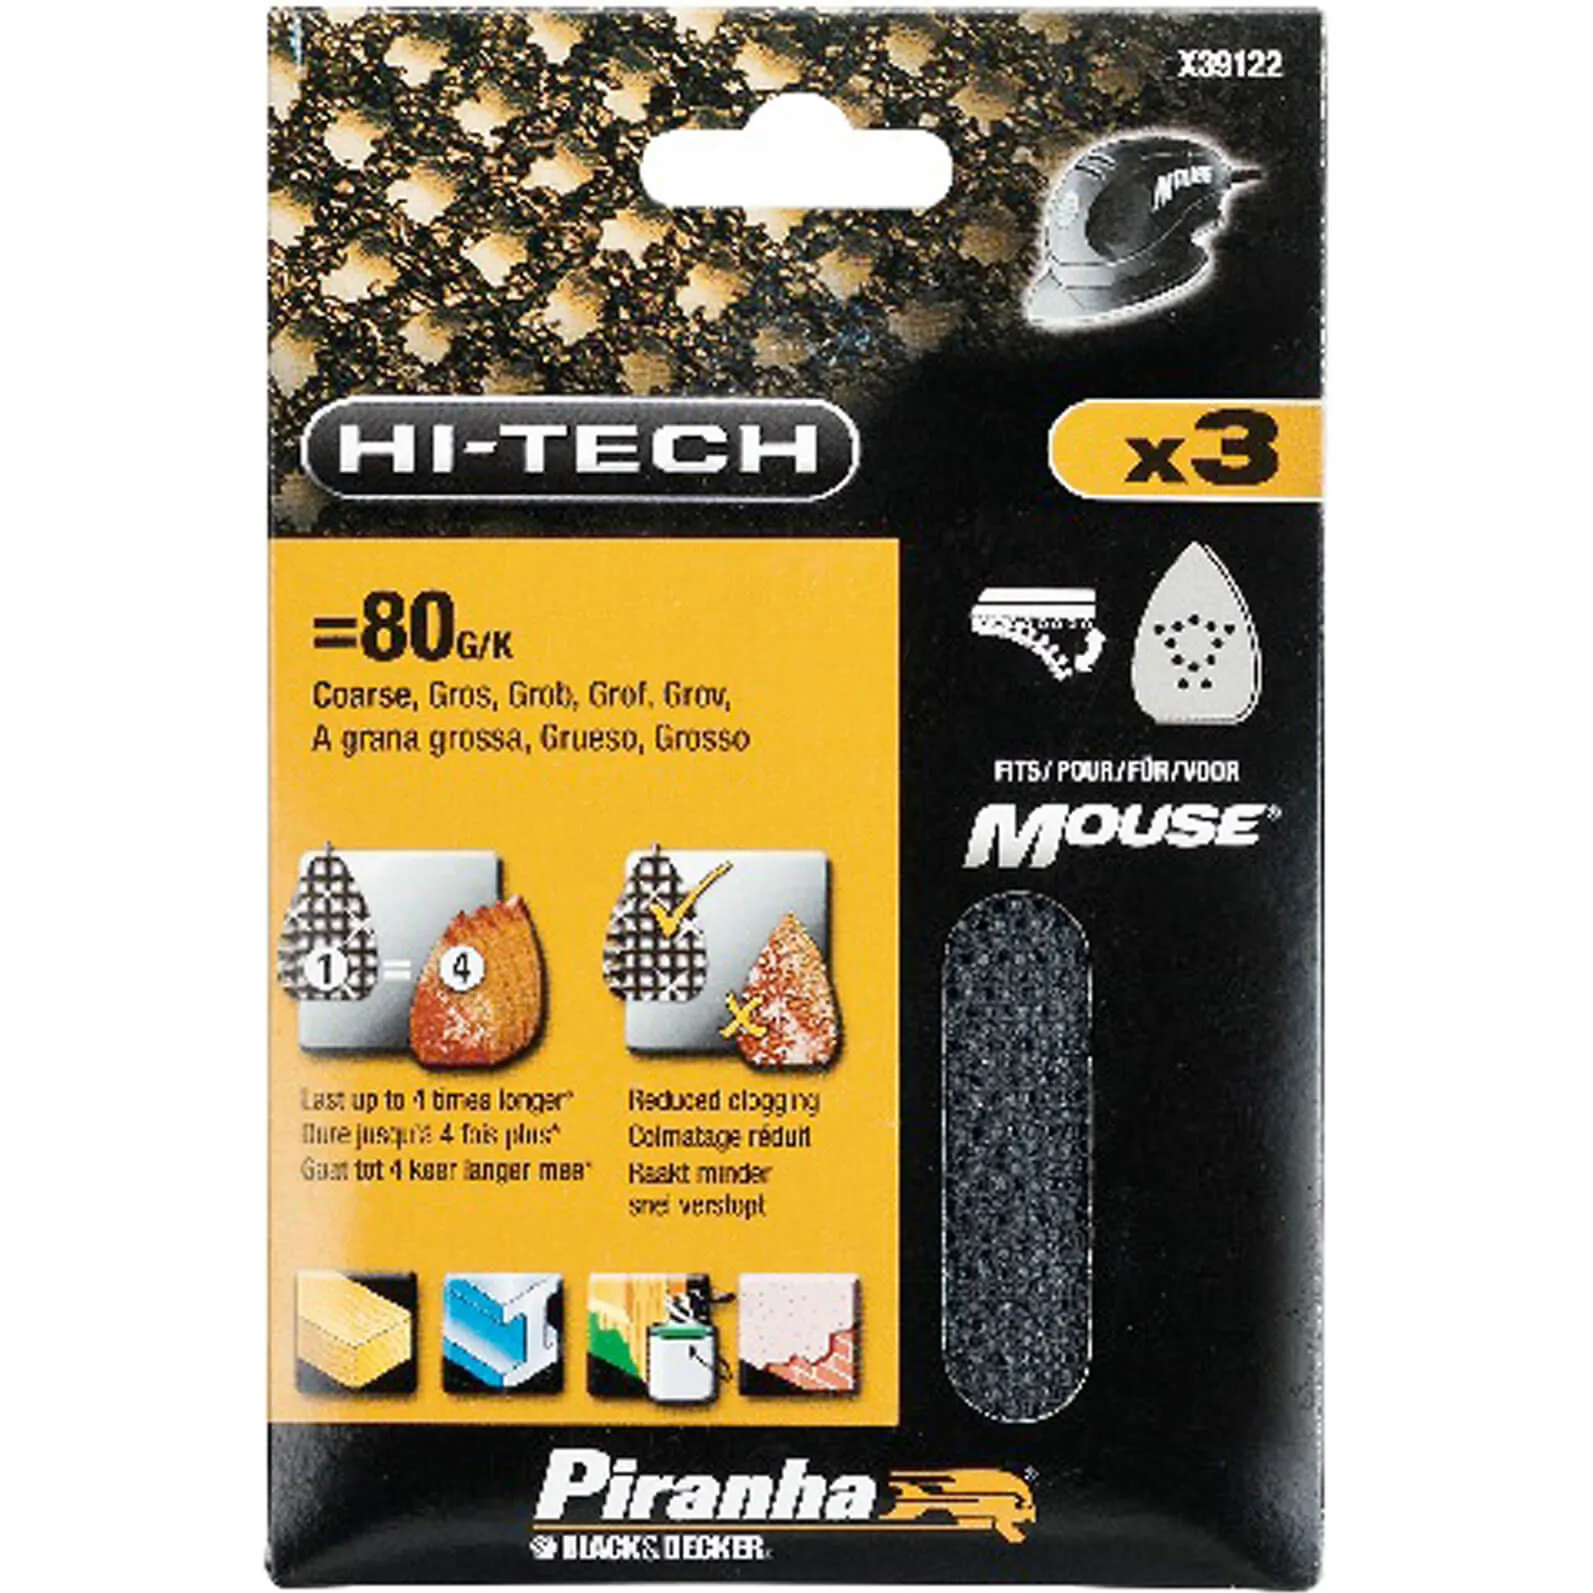 Black and Decker Piranha Hi Tech Quick Fit Mesh Mouse Sanding Sheets - 80g, Pack of 3